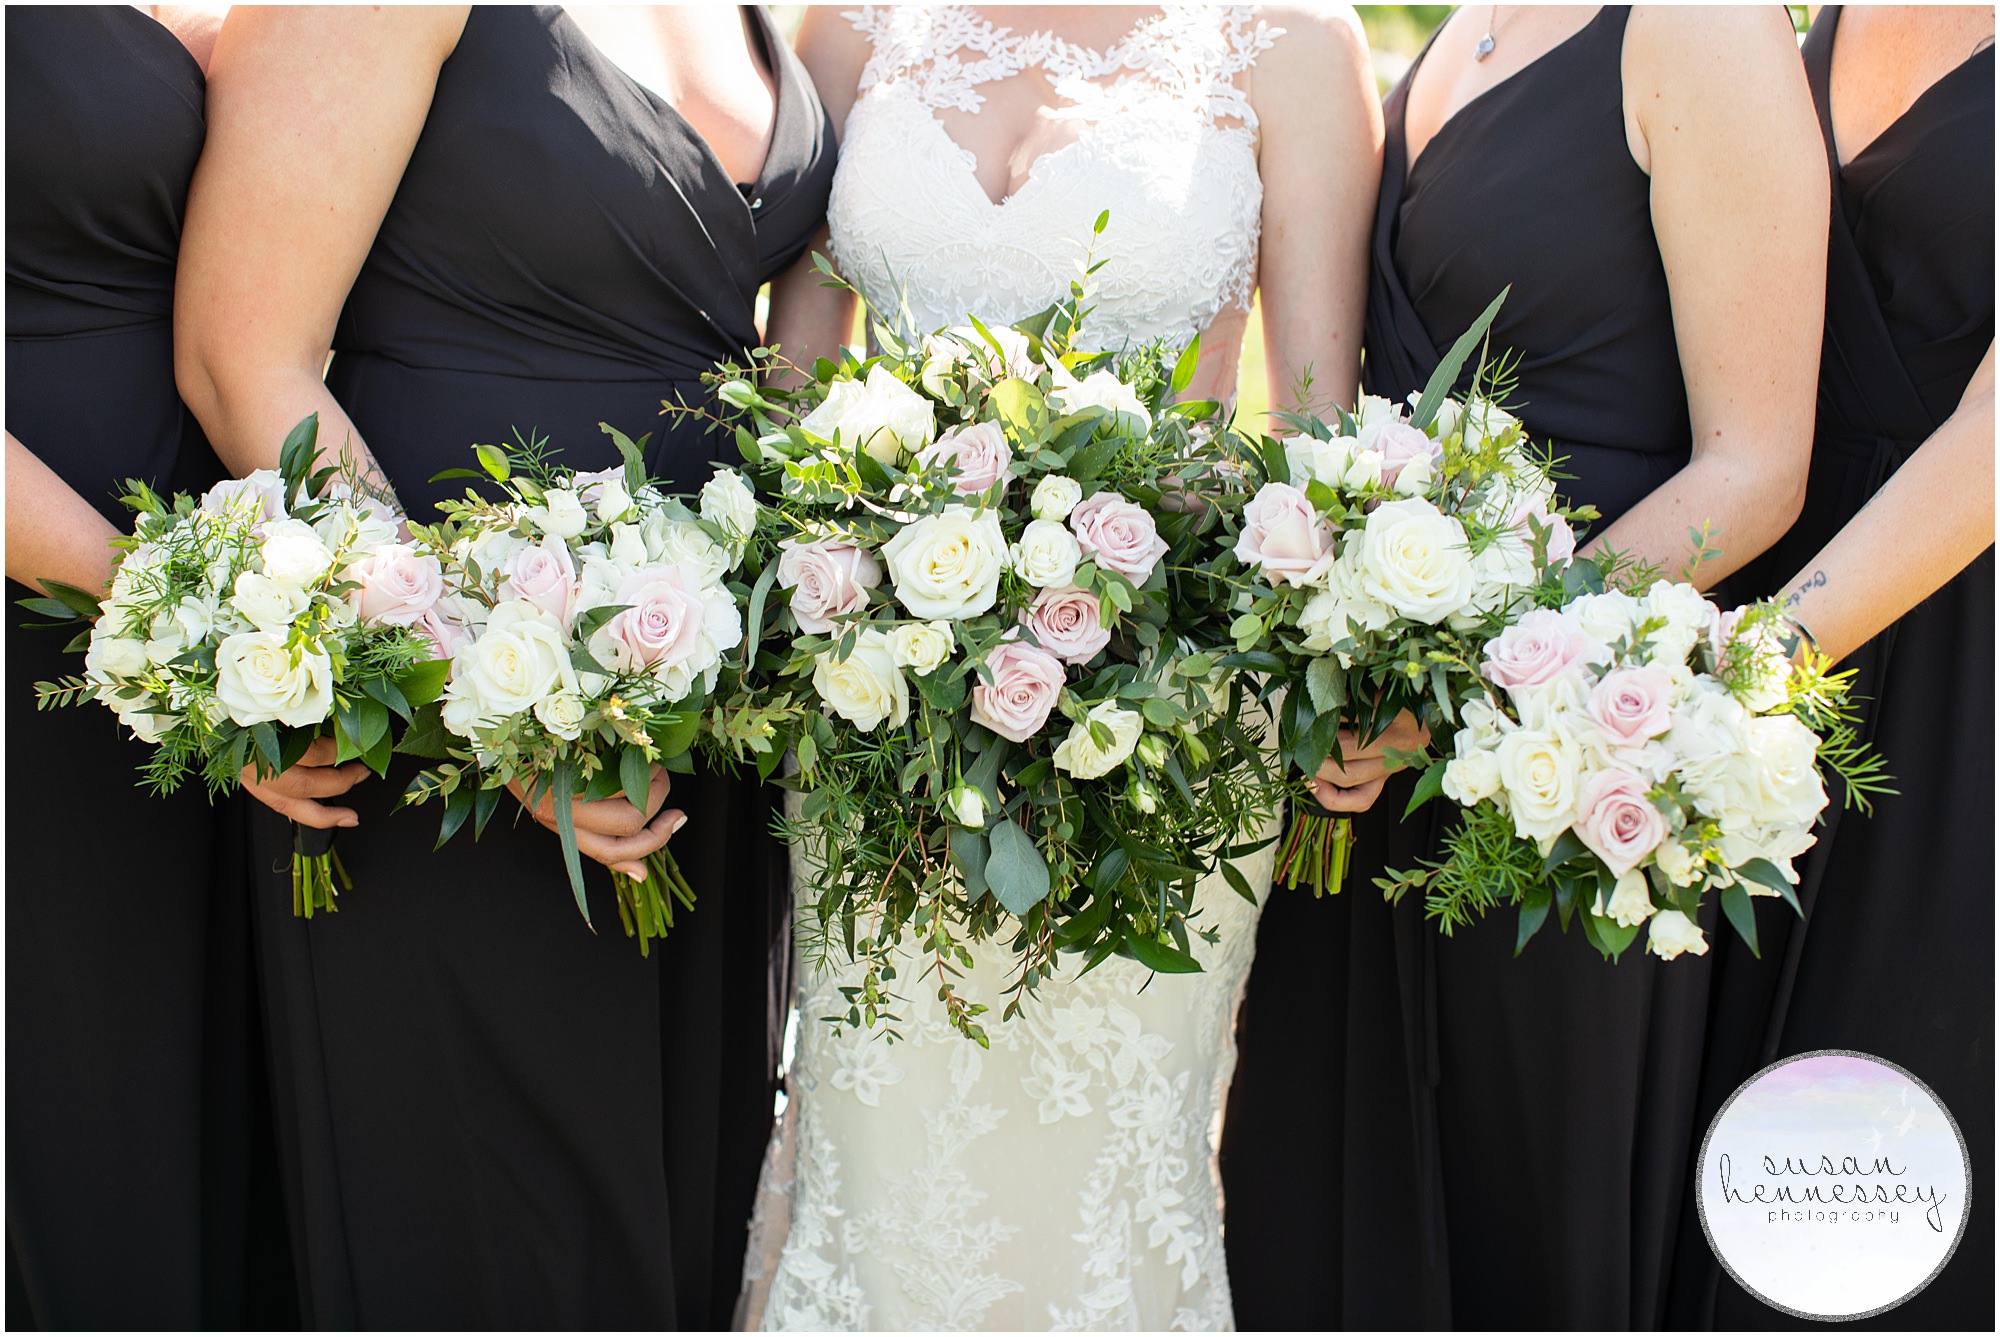 Detail of bridesmaids in black dresses and their bouquets.